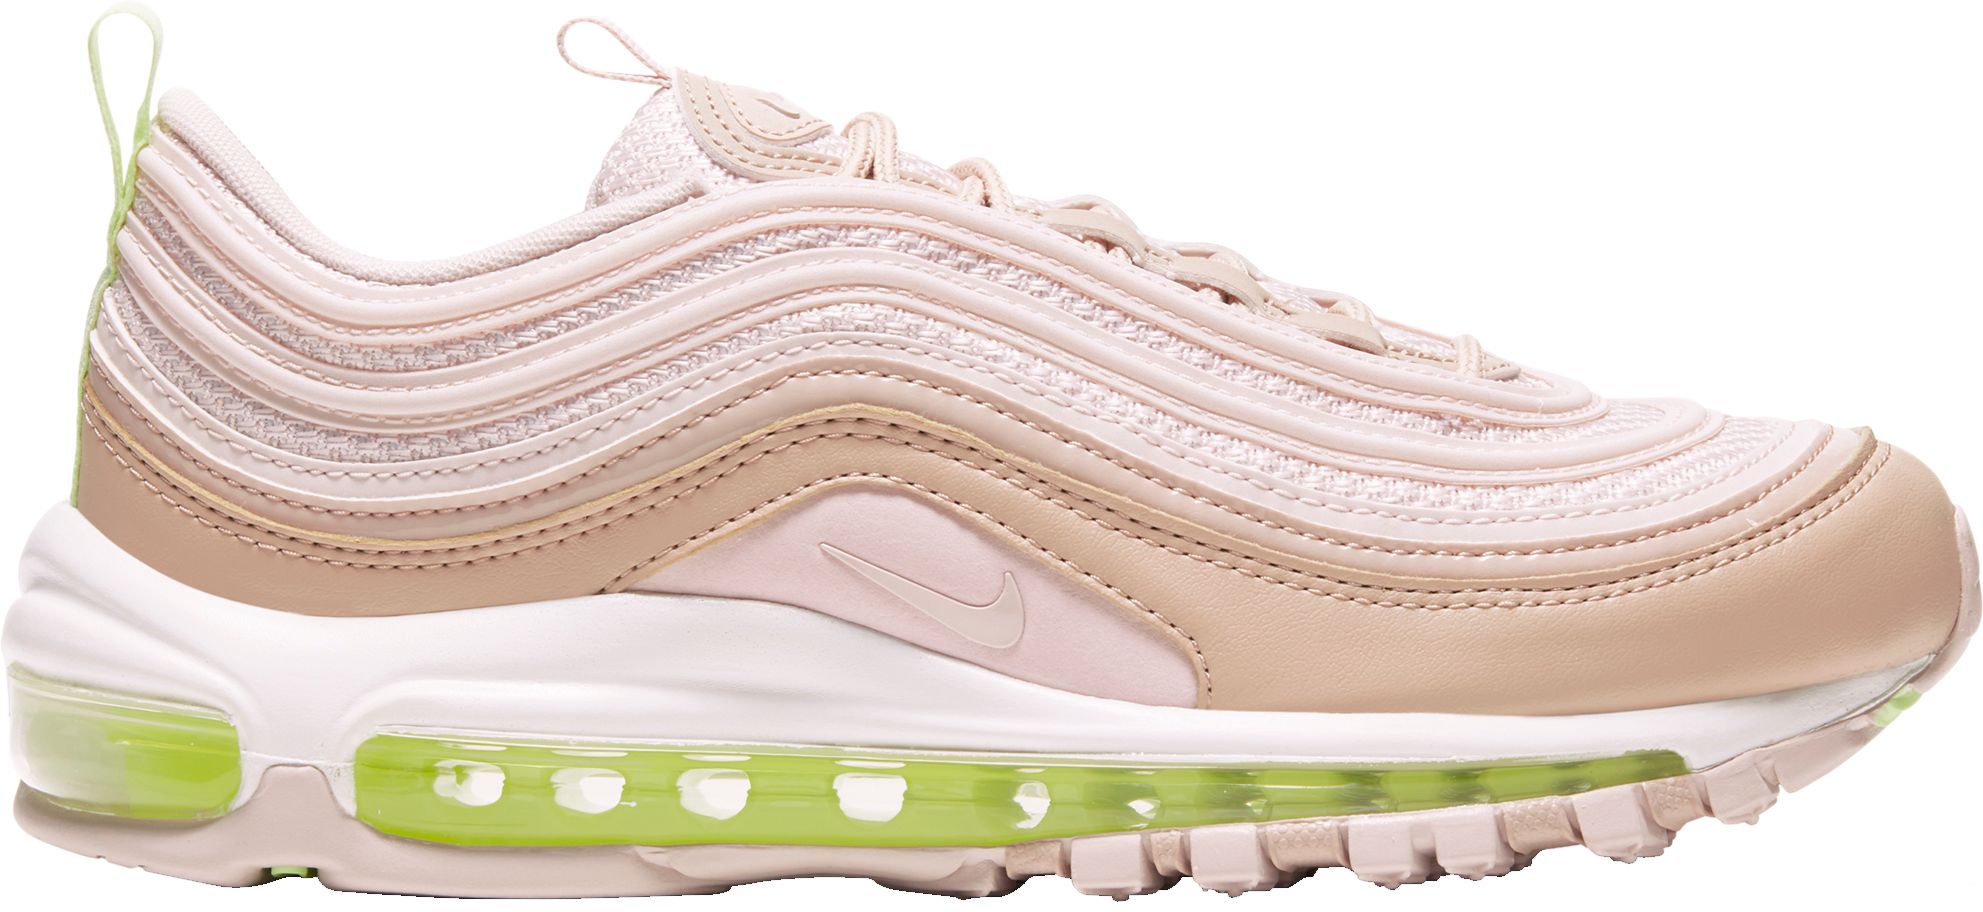 Nike Women's Air Max 97 Shoes | Free Curbside Pick Up at DICK'S